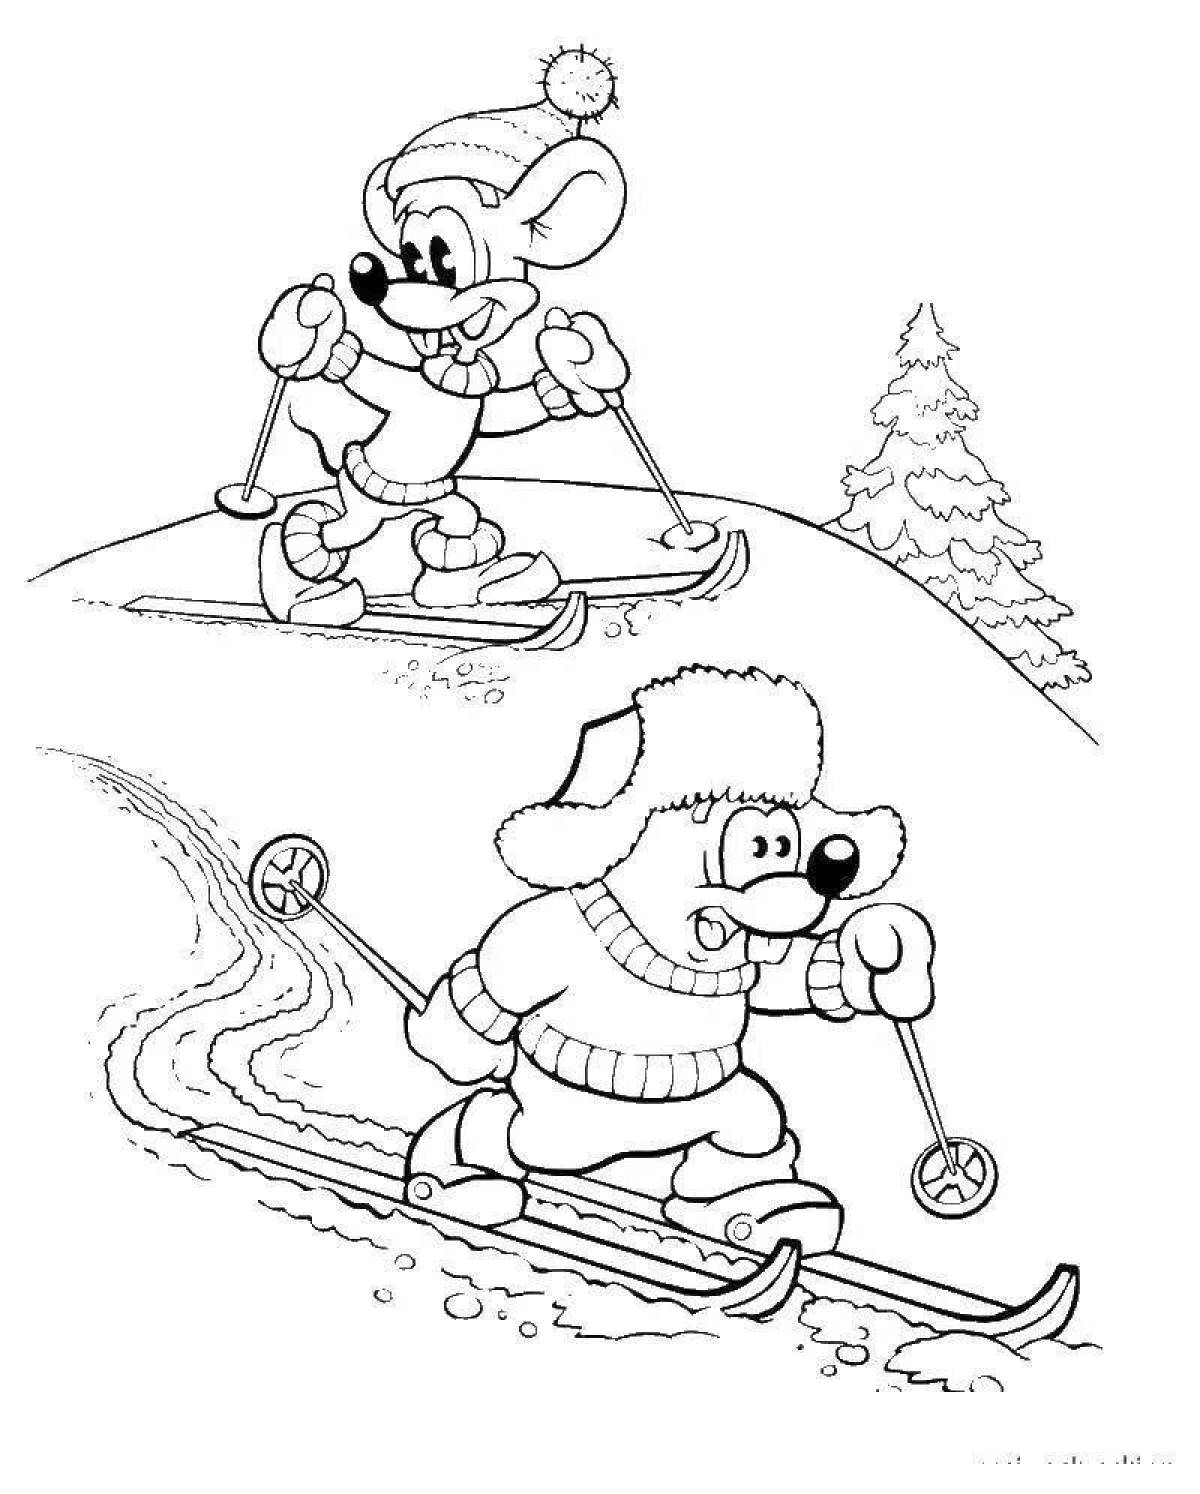 Running mouse in winter